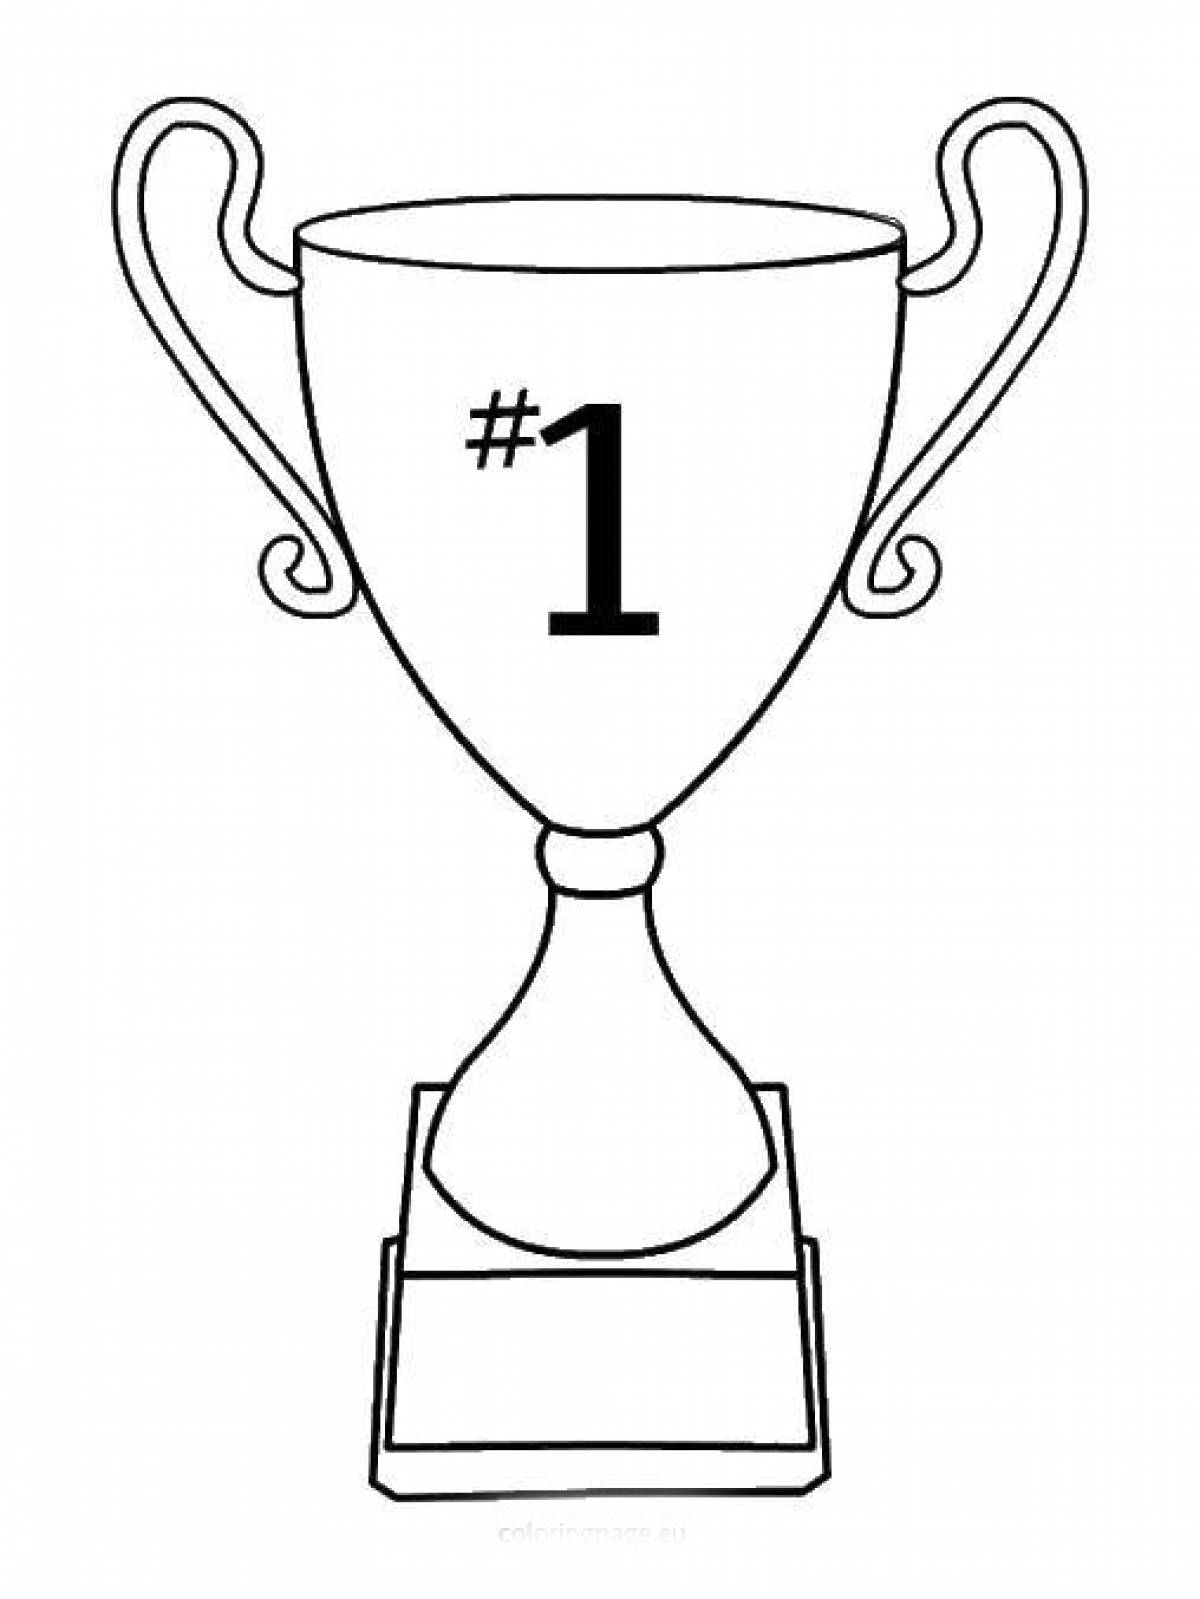 Cup for first place